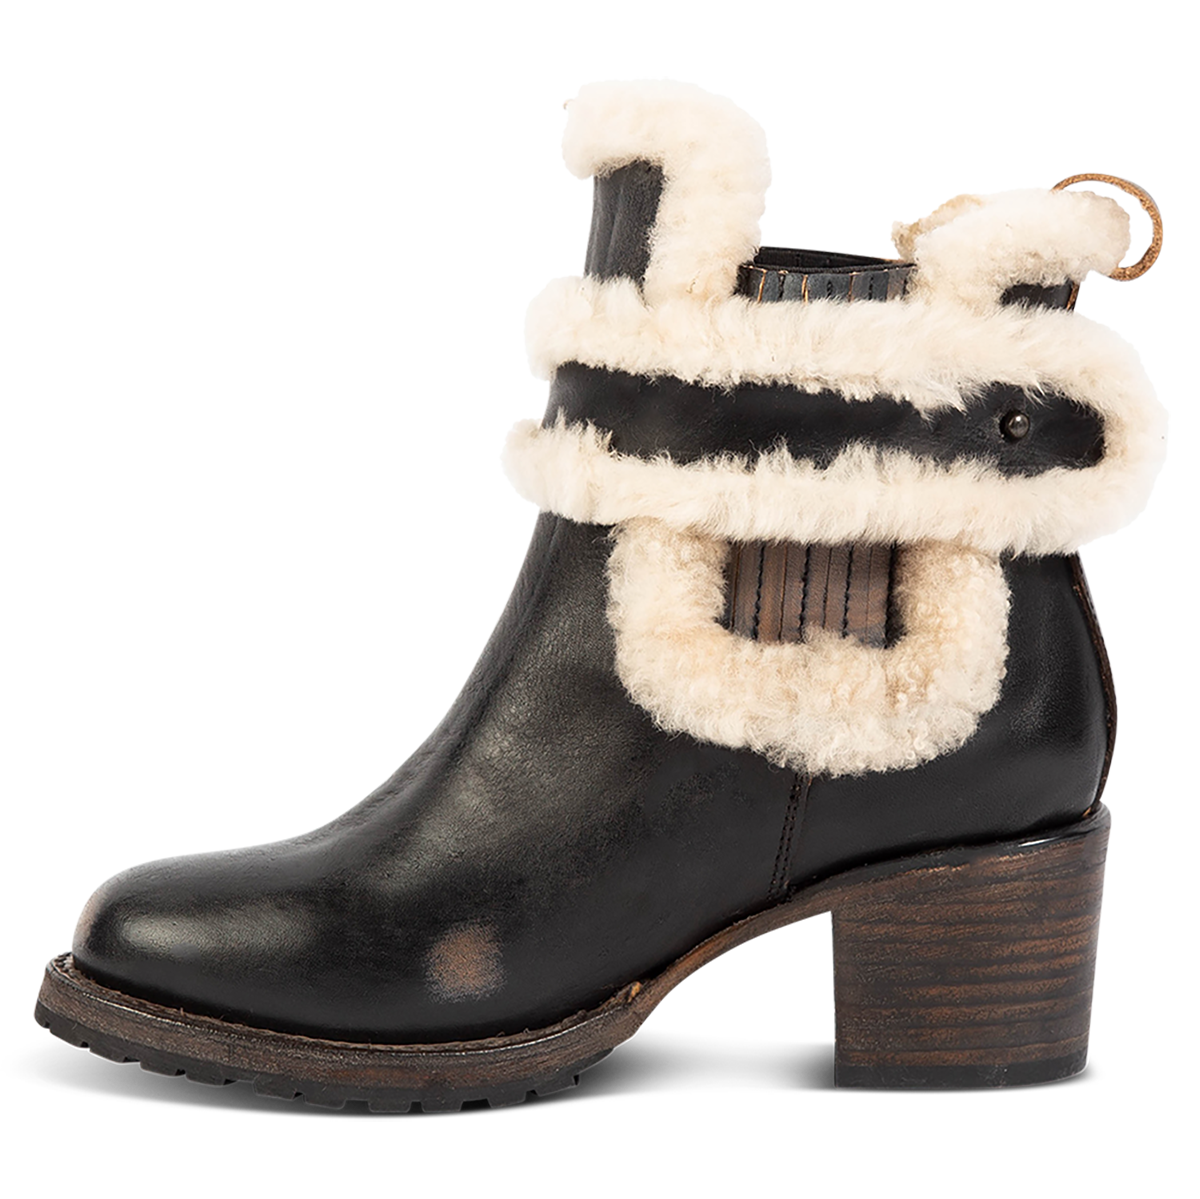 Inside view showing FREEBIRD women's Neverland black leather bootie with genuine shearling removable lining, gore detailing and a stacked heel